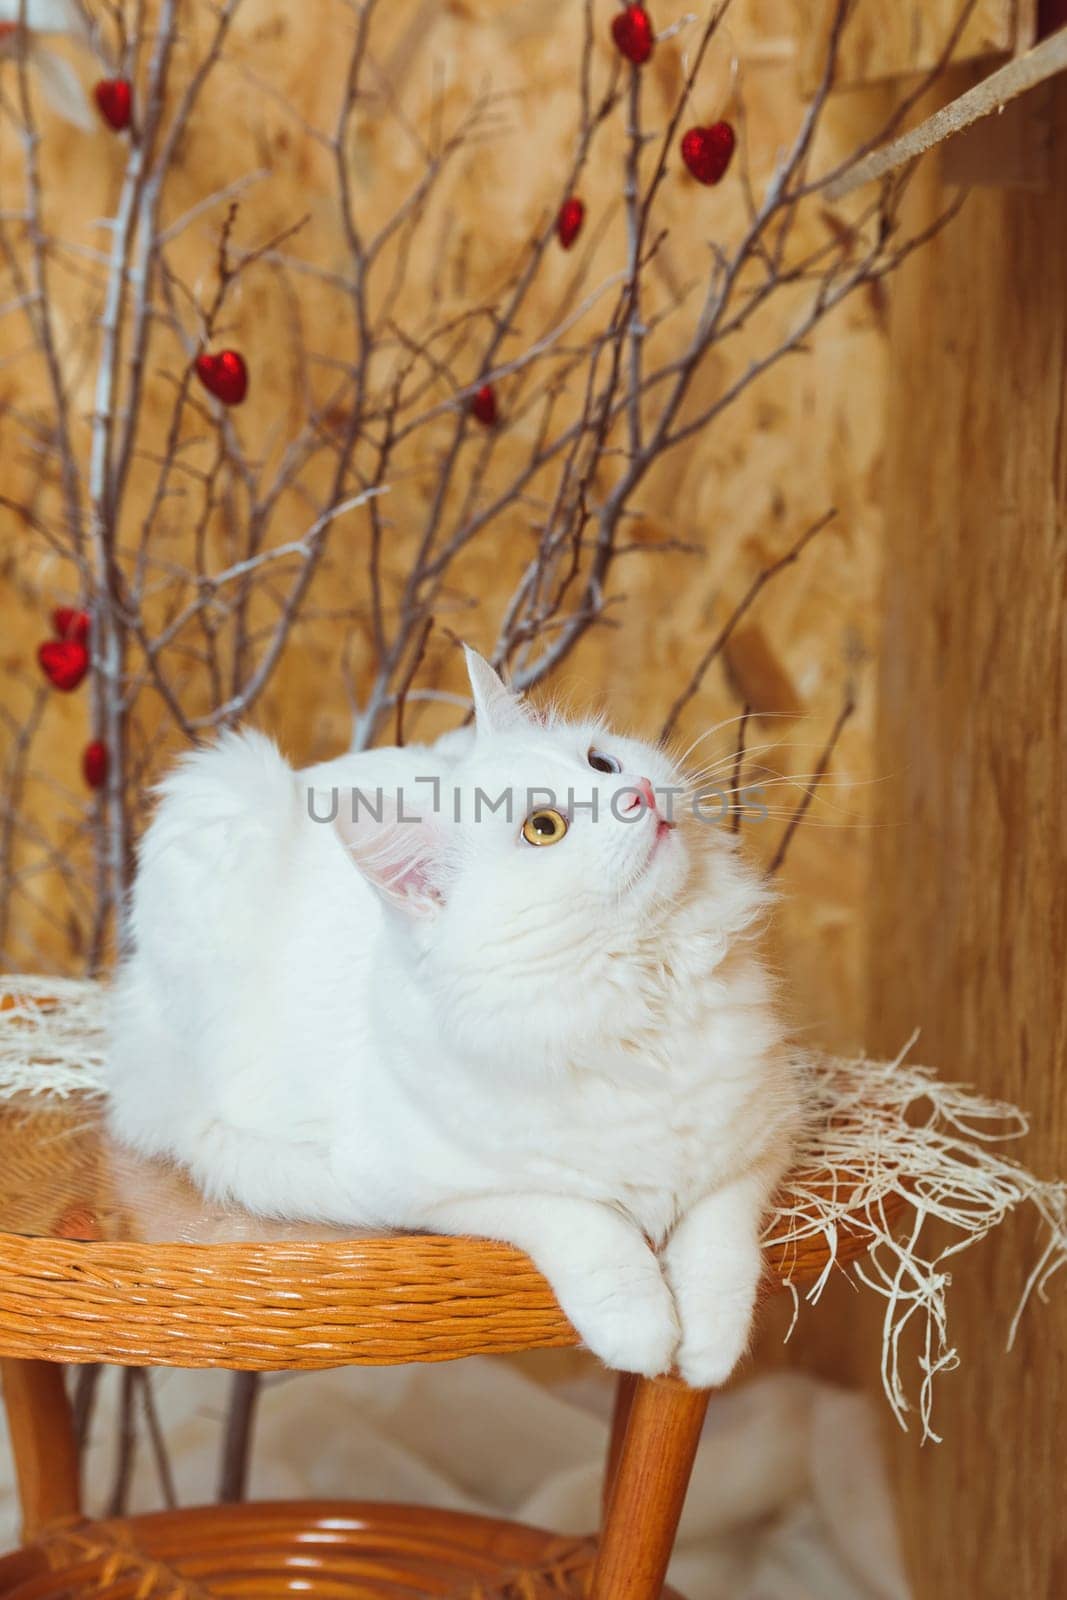 A white fluffy Angora cat with multicolored eyes lies on the table and looks up